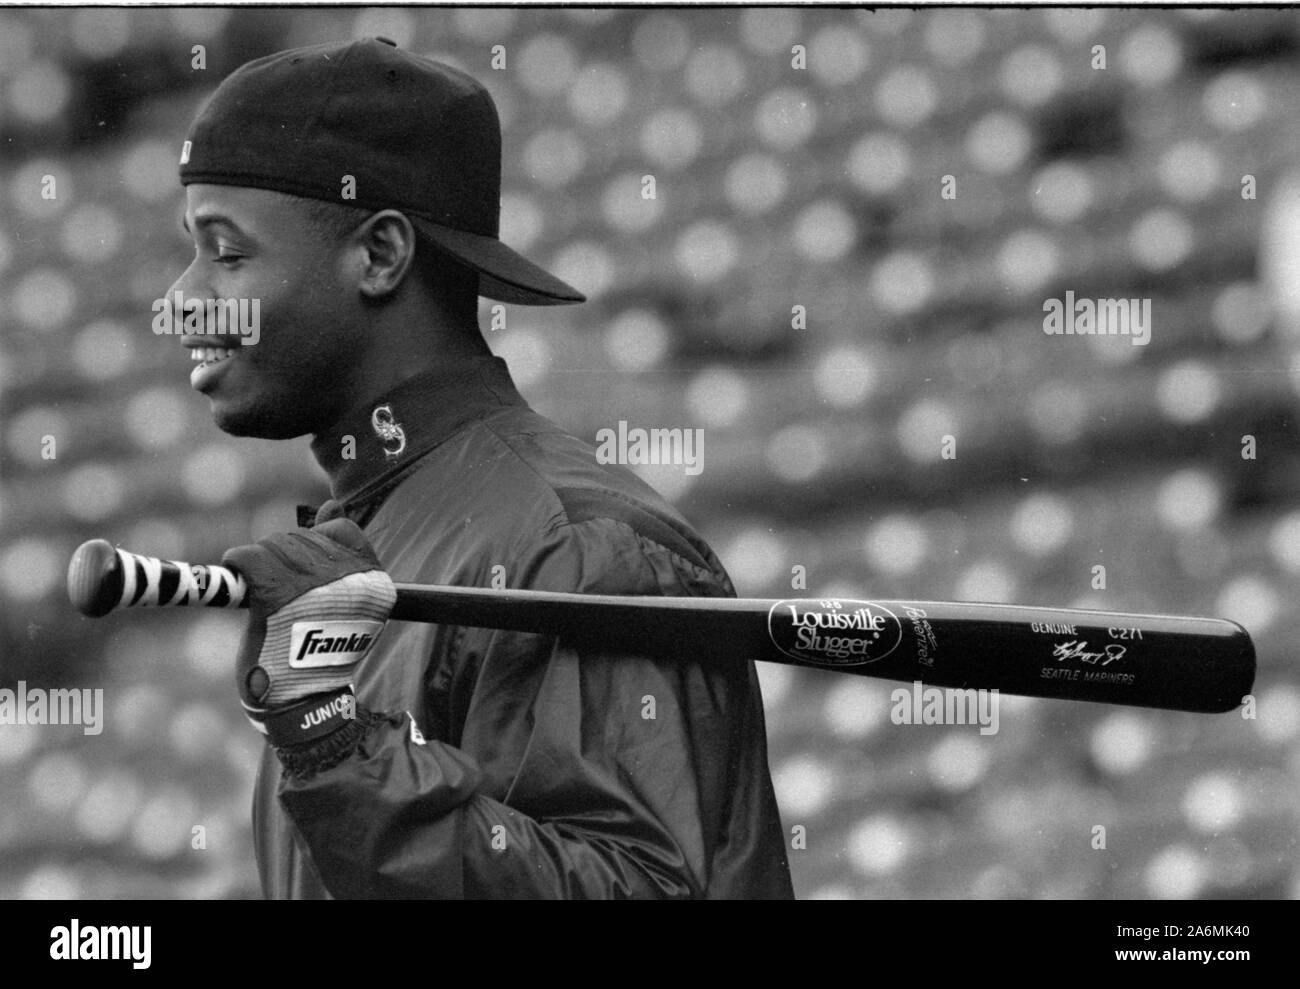 Seattle Mariners Ken Griffy jr watching the field during batting practice before playing against the Boston Red Sox at Fenway Park in Boston Ma USA 1996 photo by bill belknap Stock Photo